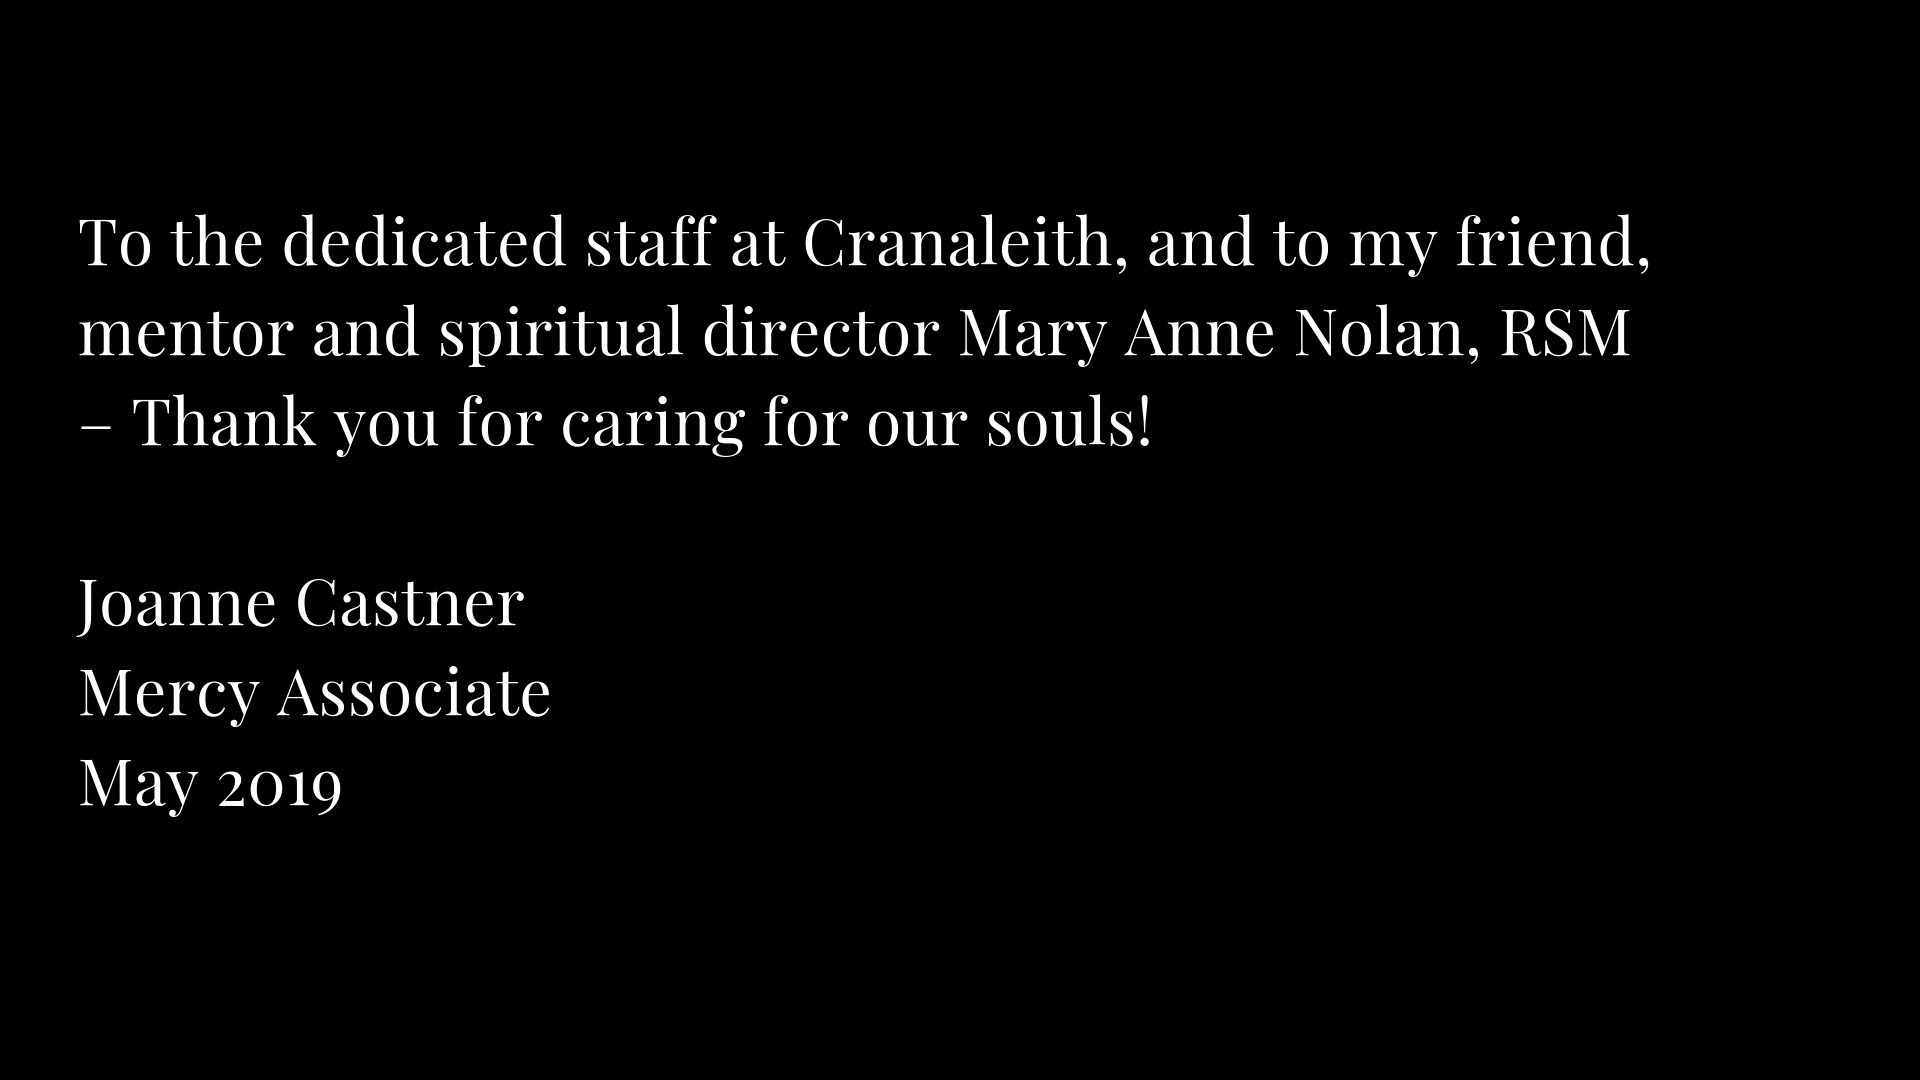 A black and white image of an email from the mary anne nolan, spiritual director.